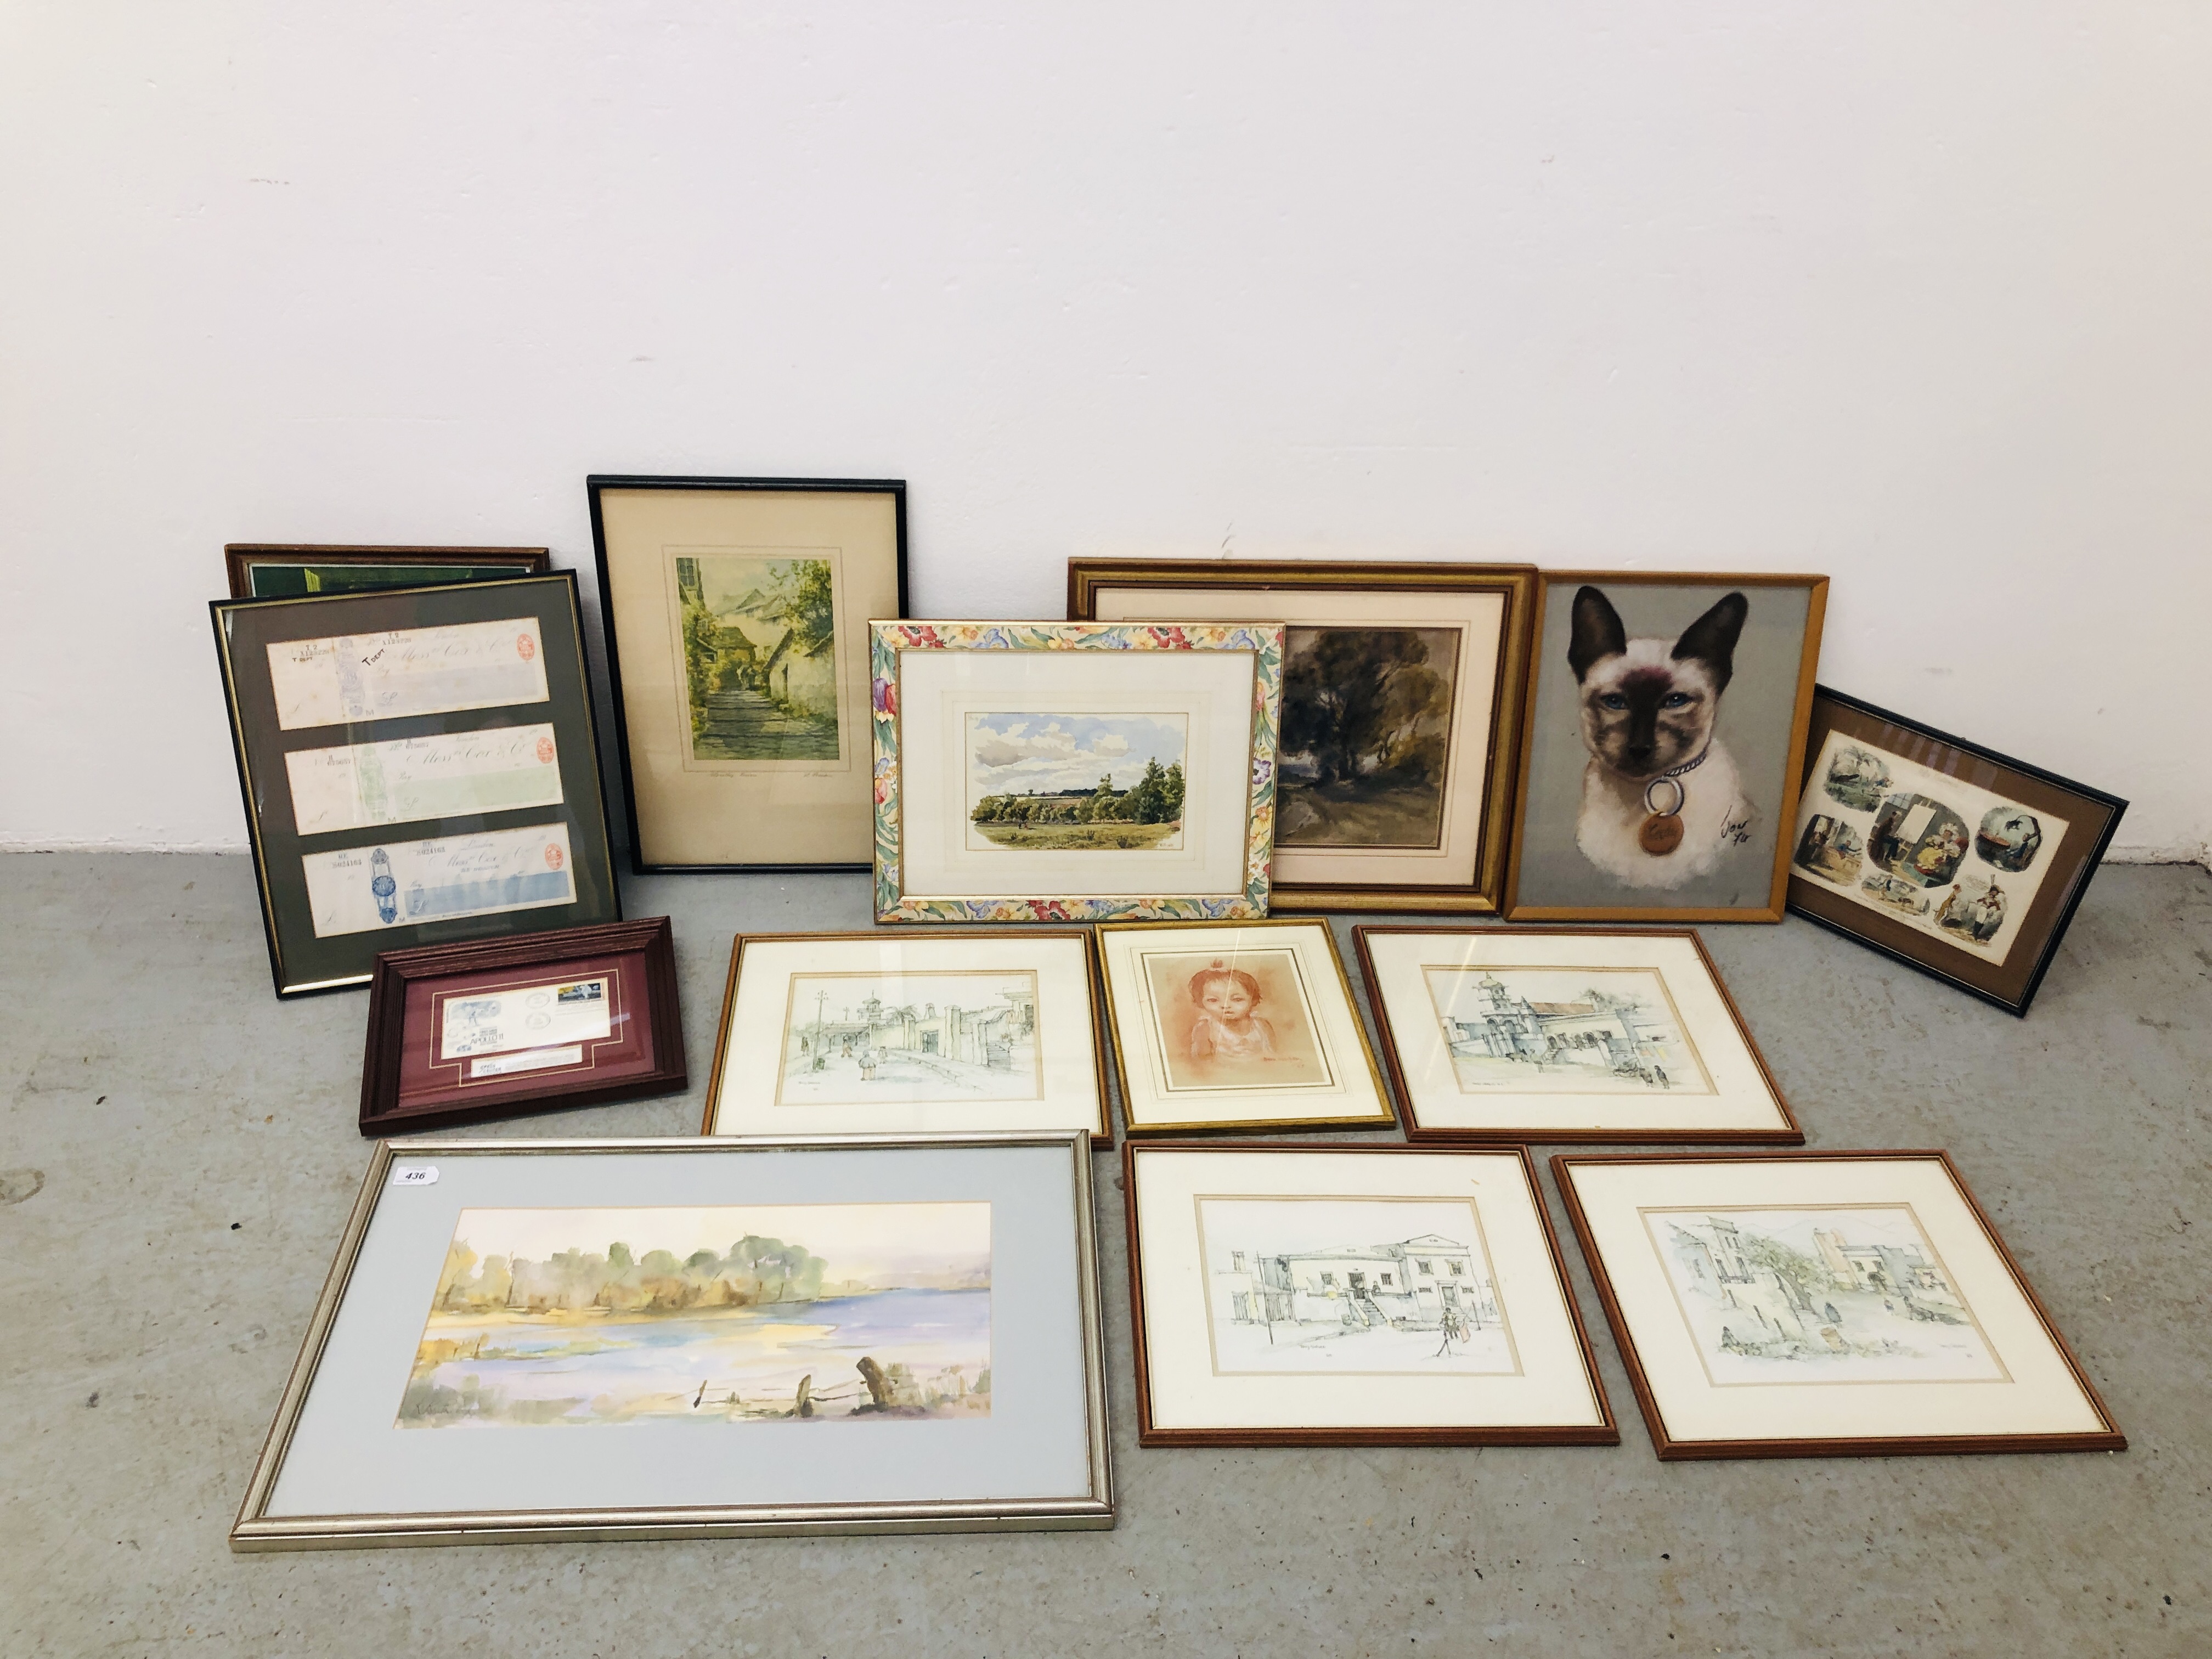 13 FRAMED AND MOUNTED PICTURES, PRINTS, AND WATER COLOURS OF LANDSCAPE BEARING MONOGRAM HLH 1896,